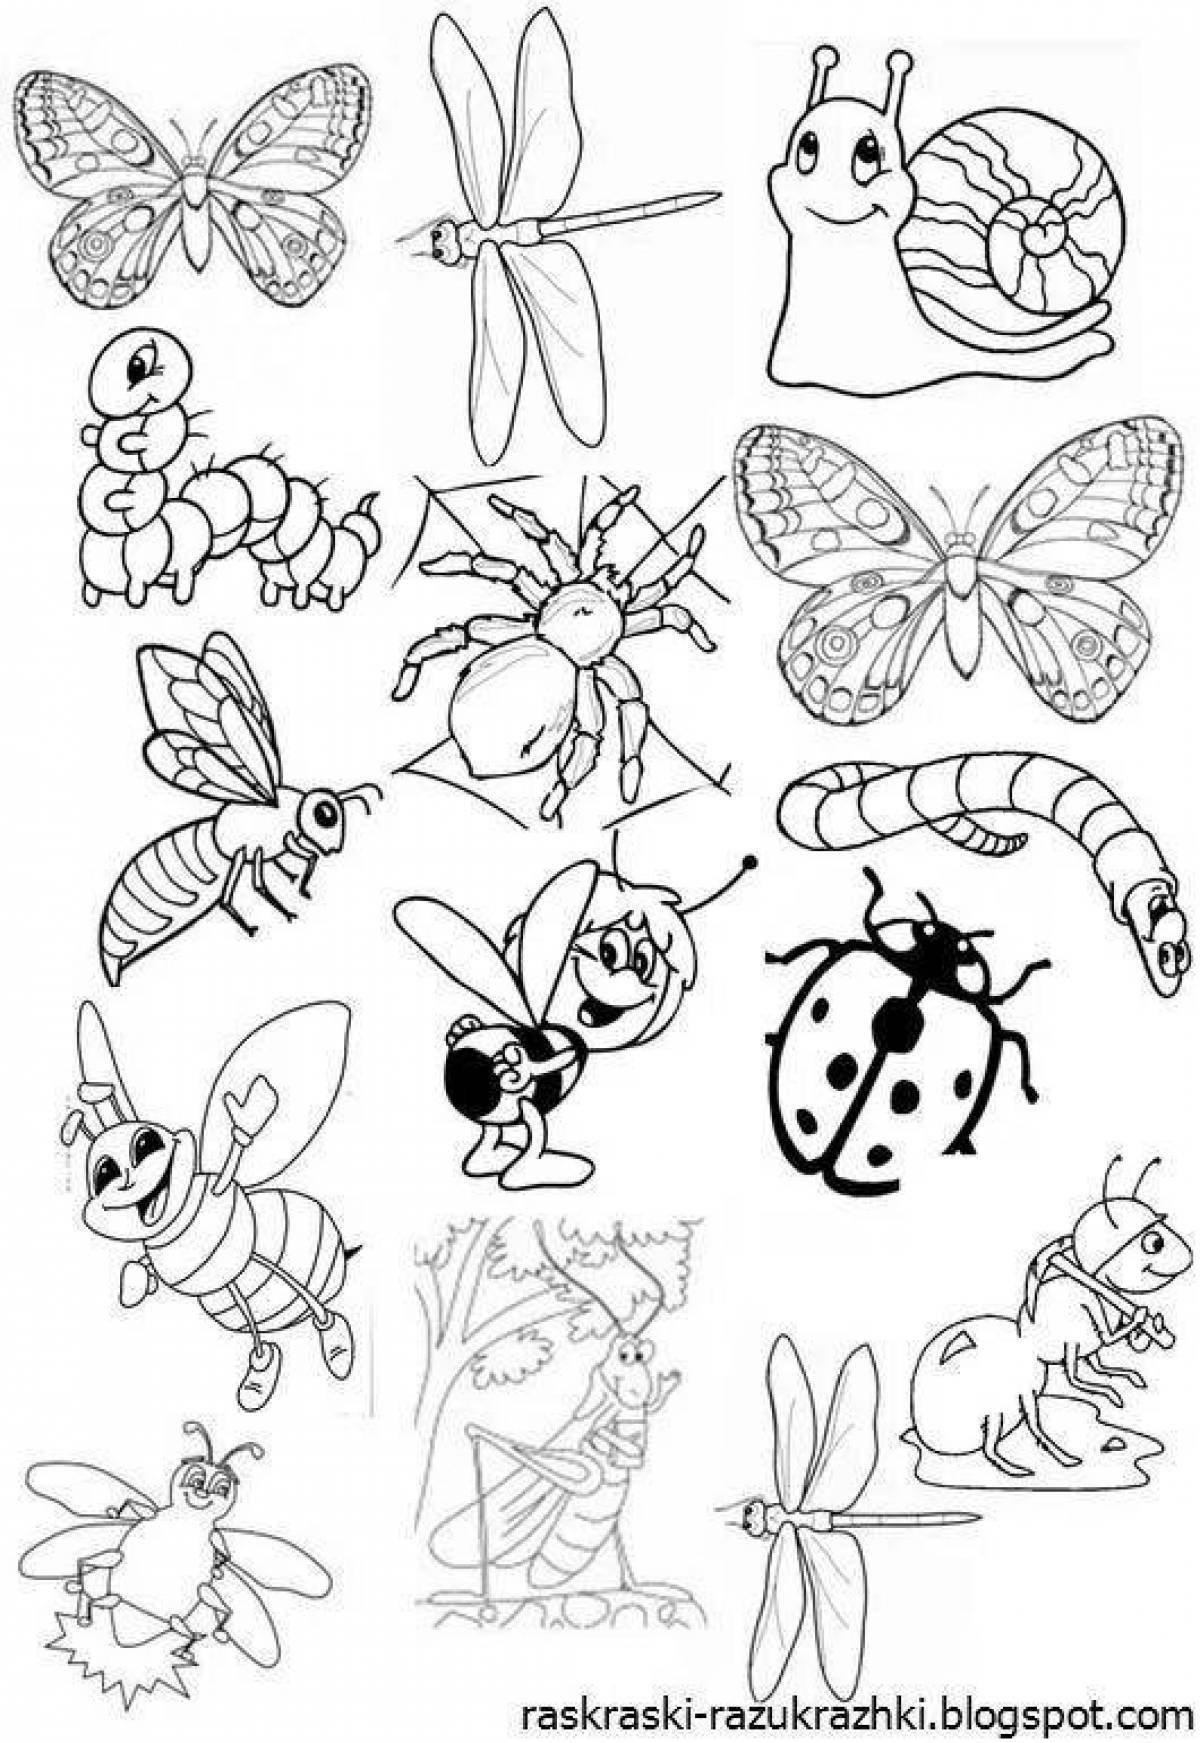 Adorable insect coloring book for 4-5 year olds